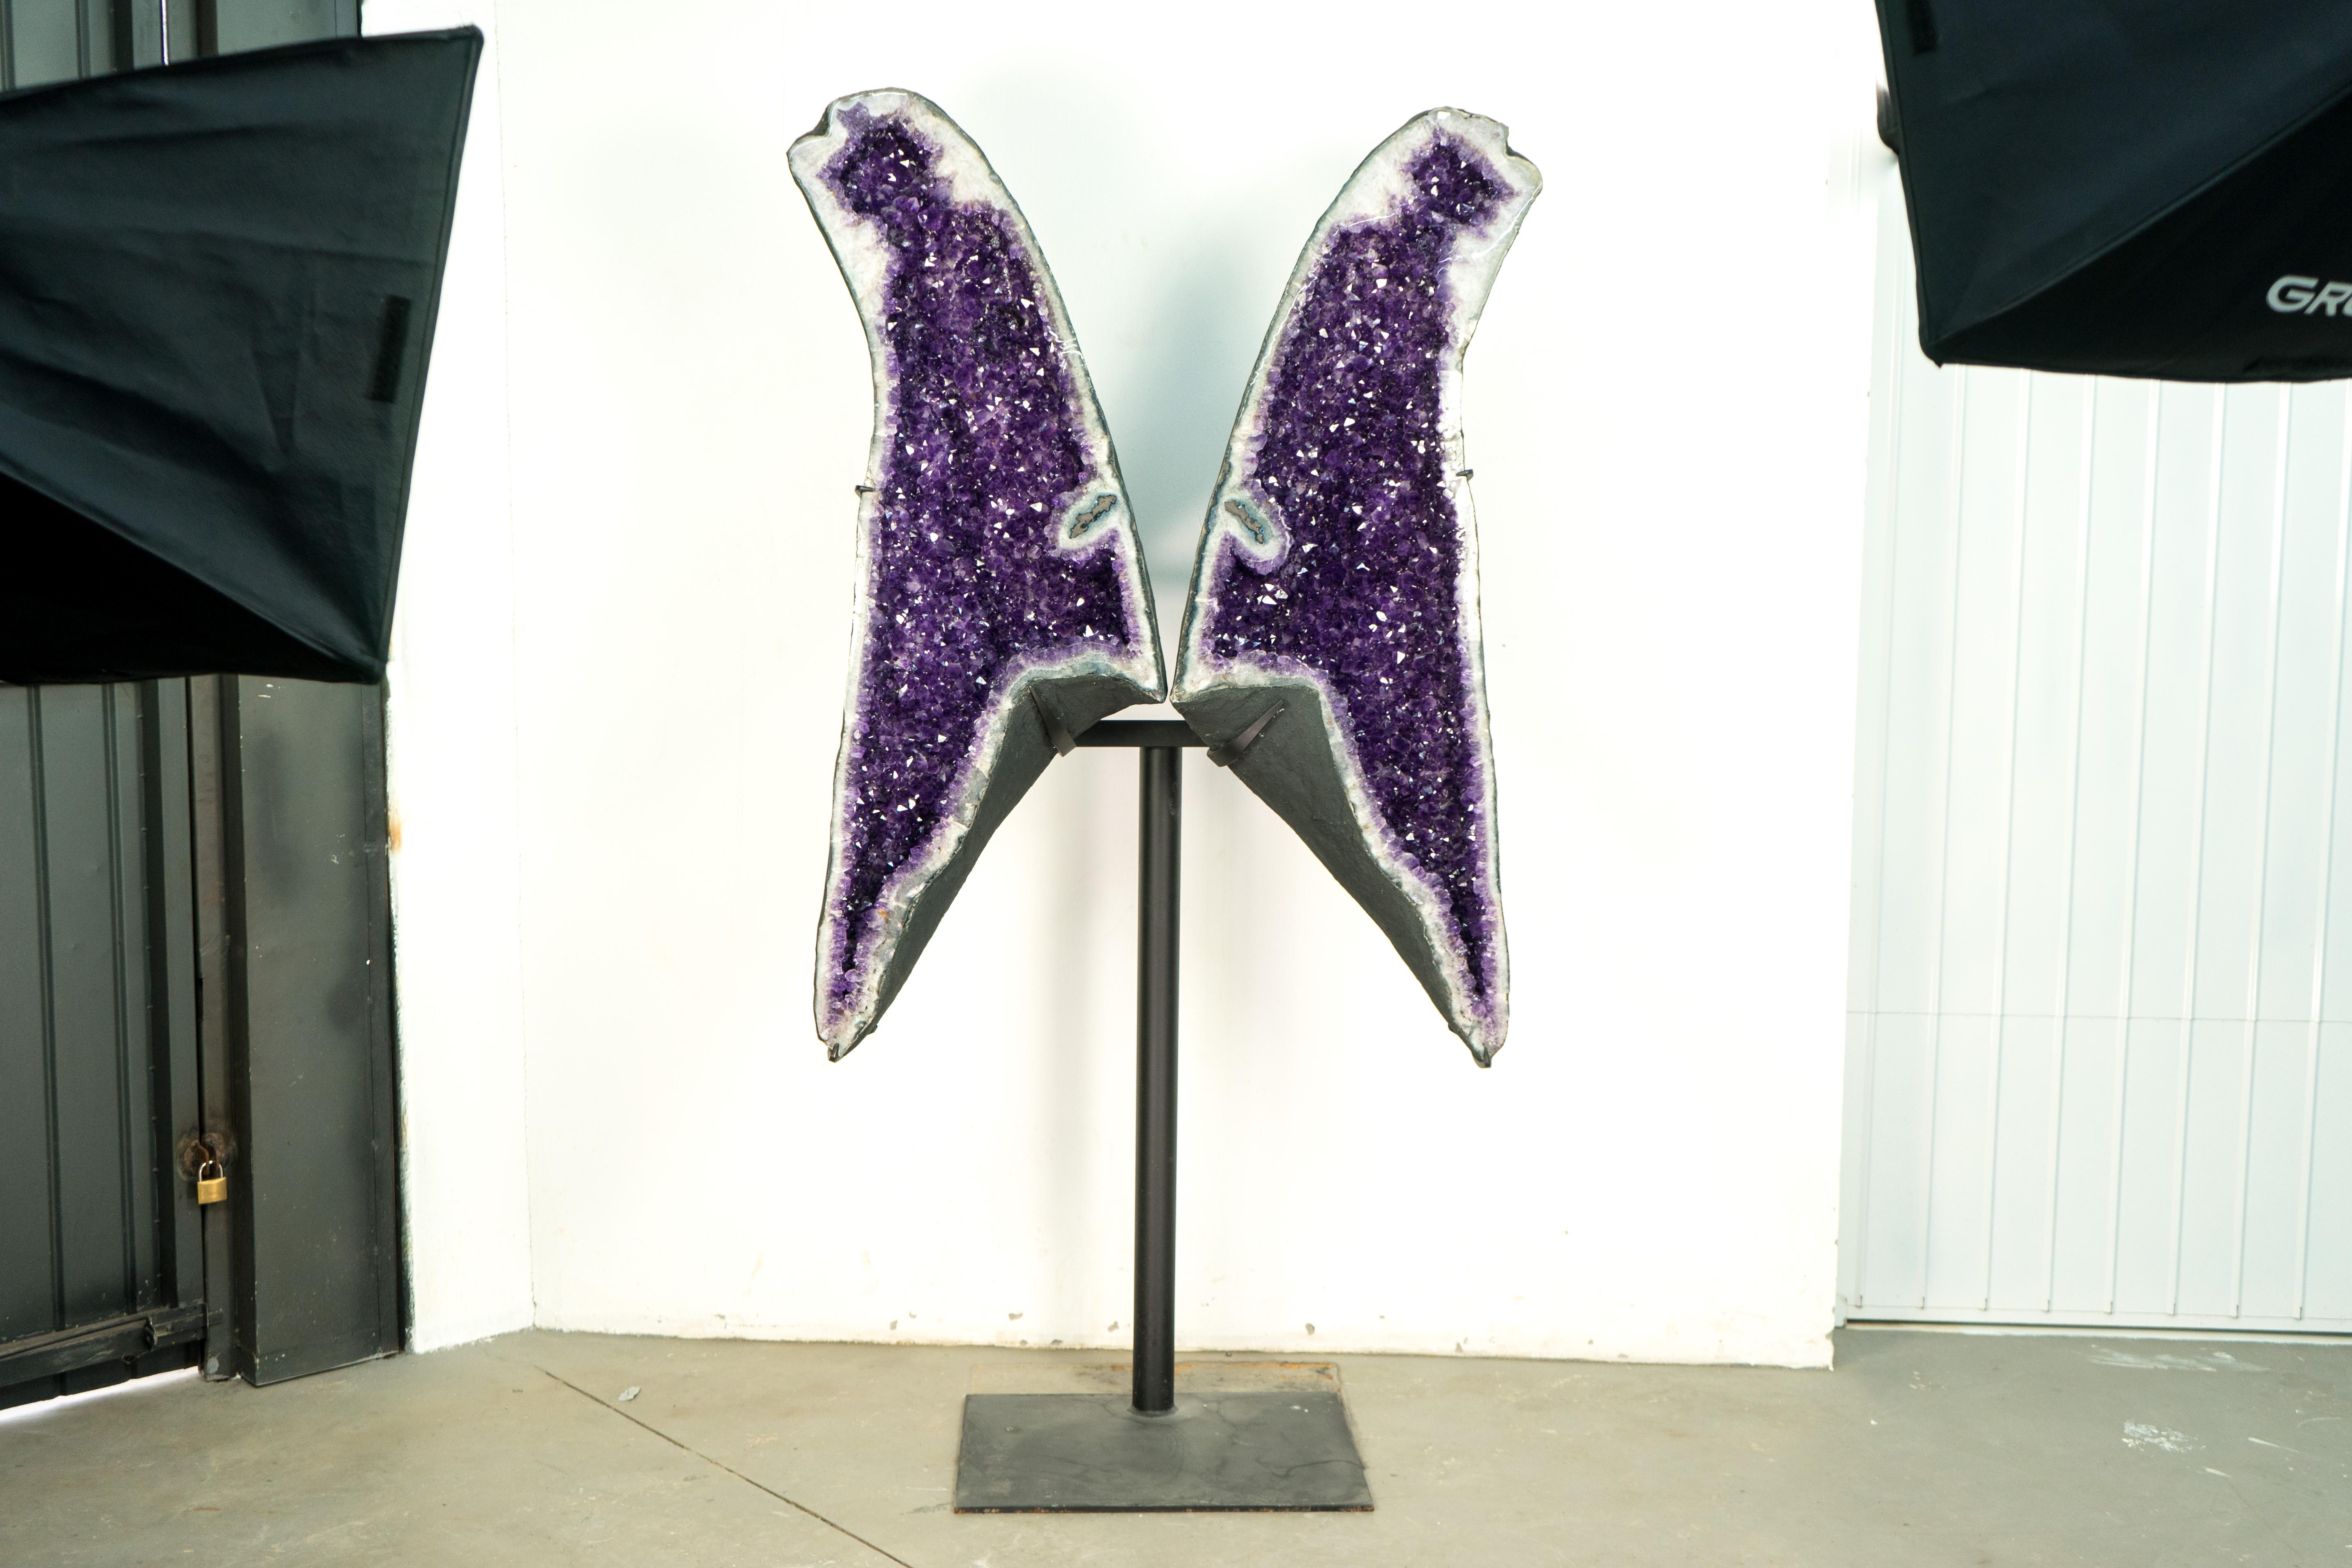 Tall, Rare, 6.1 Ft Amethyst Geode Wings with AAA Deep Purple Amethyst Druzy

▫️ Description

Naturally sculpted and standing at an impressive height of 6.1 feet, this Amethyst Geode has taken the form of a perfect butterfly or angel wings. A